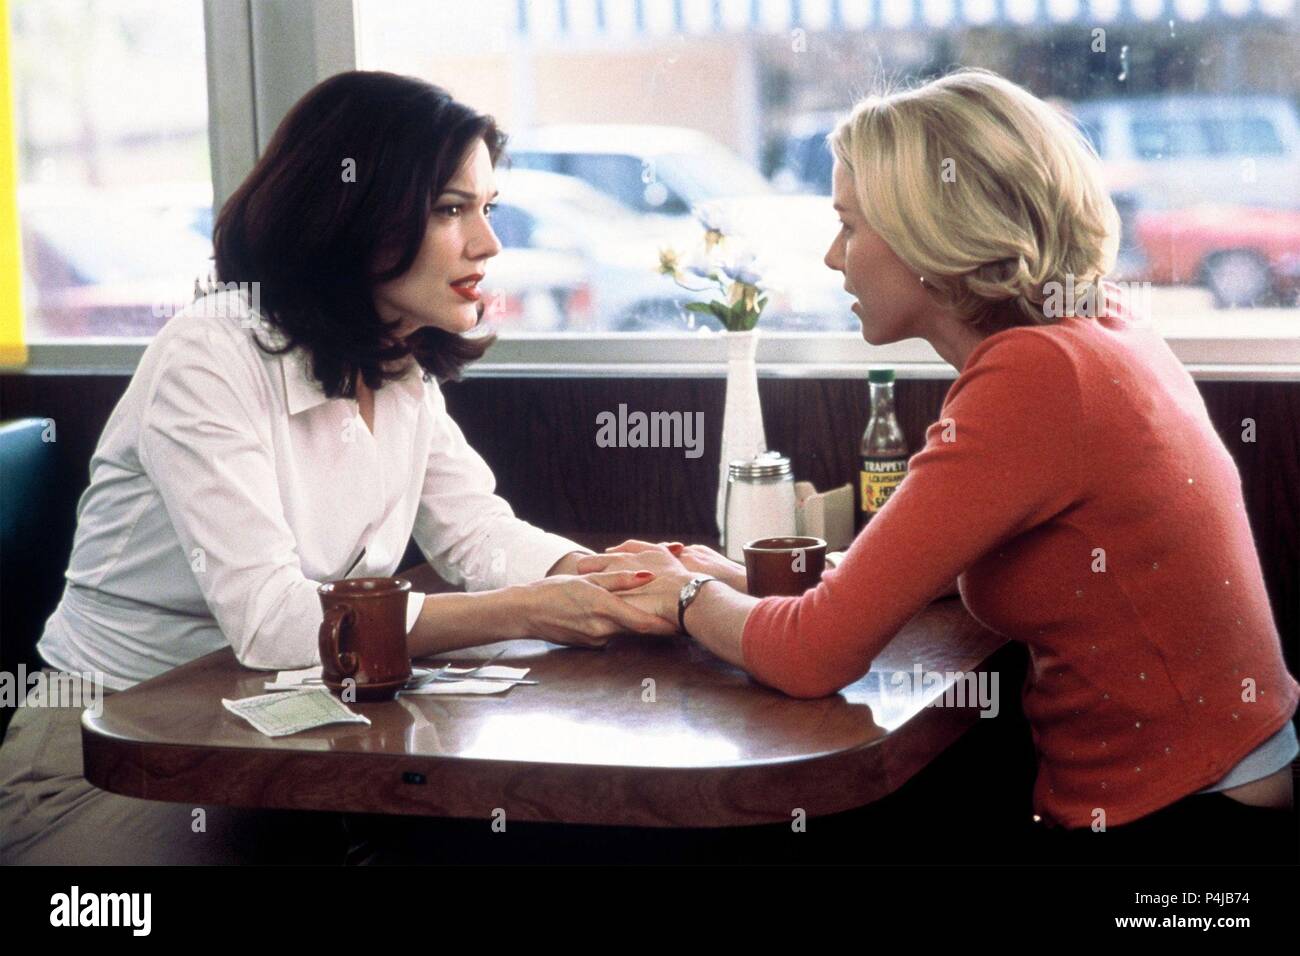 Original Film Title: MULHOLLAND DR..  English Title: MULHOLLAND DRIVE.  Film Director: DAVID LYNCH.  Year: 2001.  Stars: NAOMI WATTS; LAURA HARRING. Credit: THE PICTURE FACTORY ASYMMETRICAL PRODUCTIONS/IMAGINE TELEVIS / Album Stock Photo